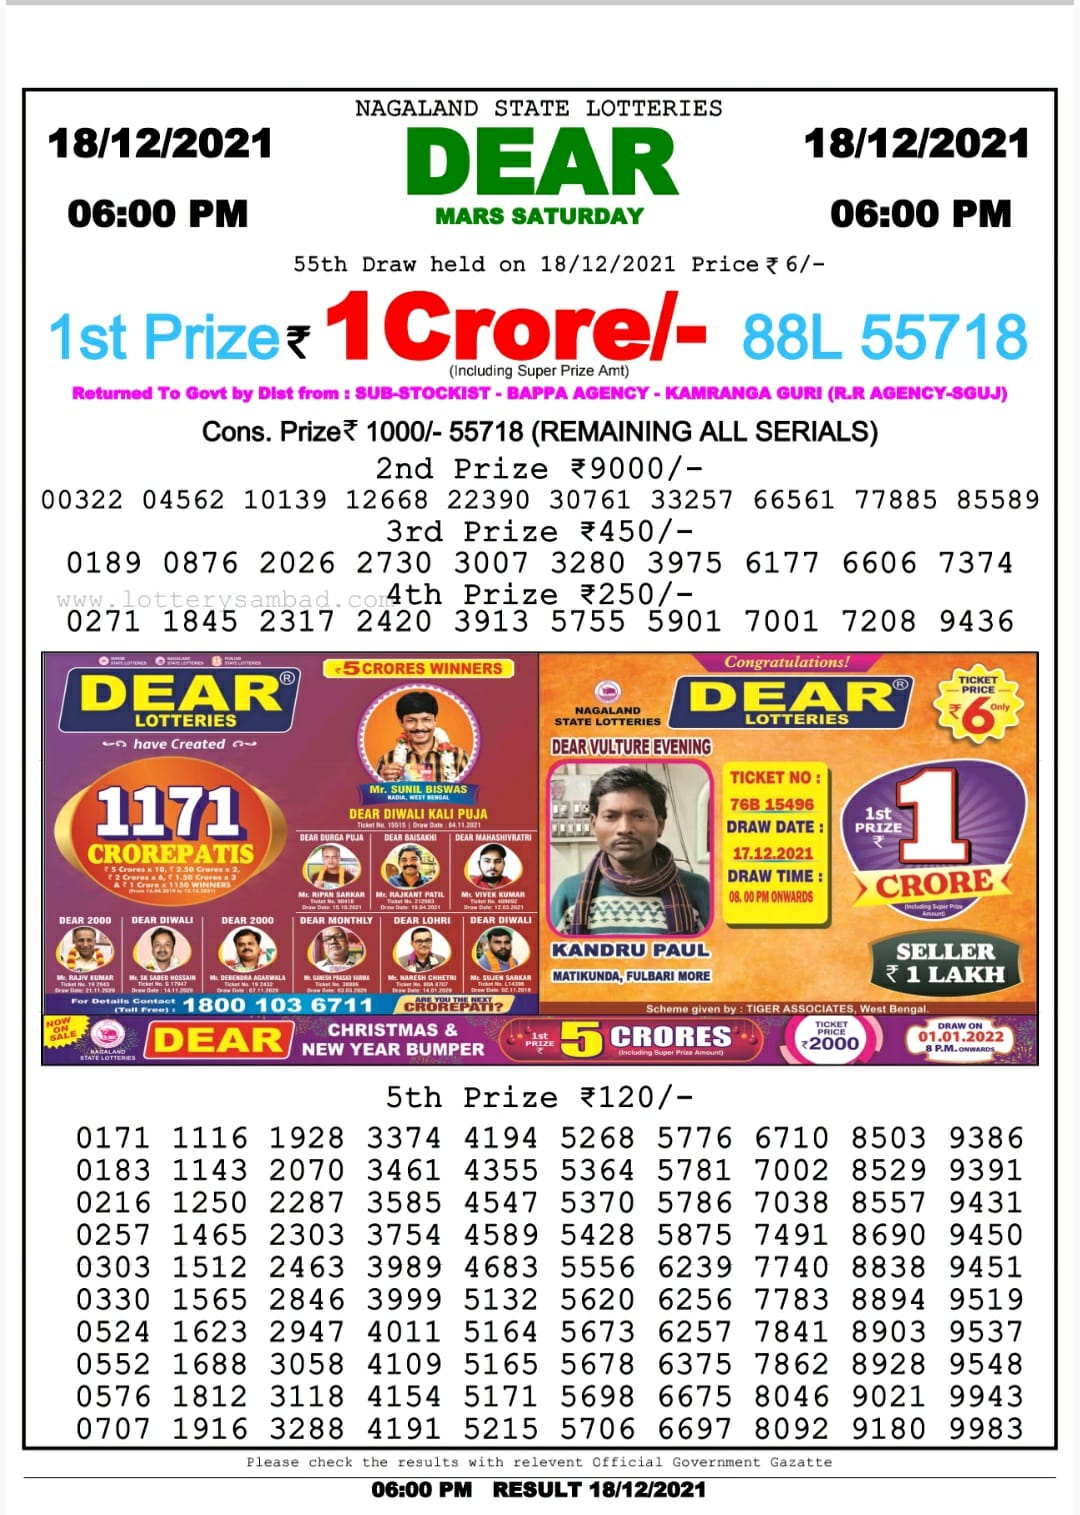 Dear Lottery Nagaland State Lottery Today 6:00 PM 18-12-2021